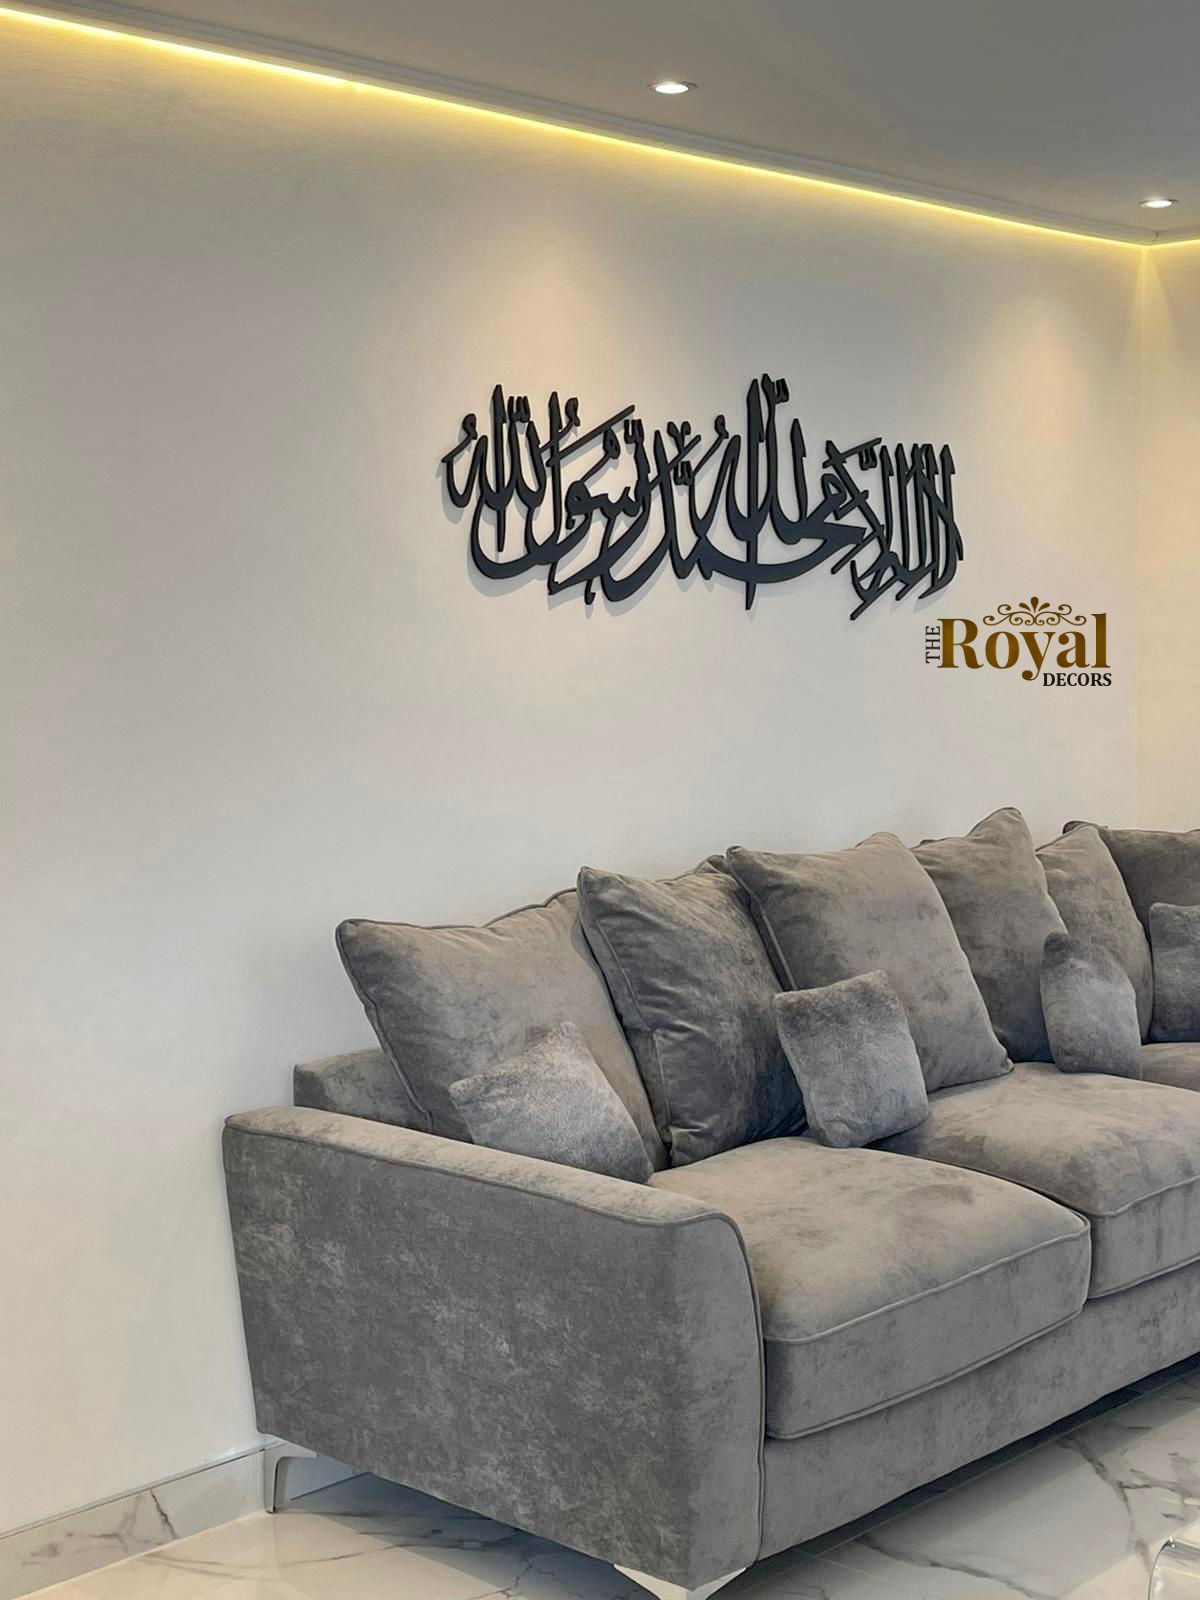 3D thick deep wooden Modern and unique handmade Kalima Shahada arabic calligraphy islamic wall art home decor in gold silver black brown grey white rosegold colours available to order